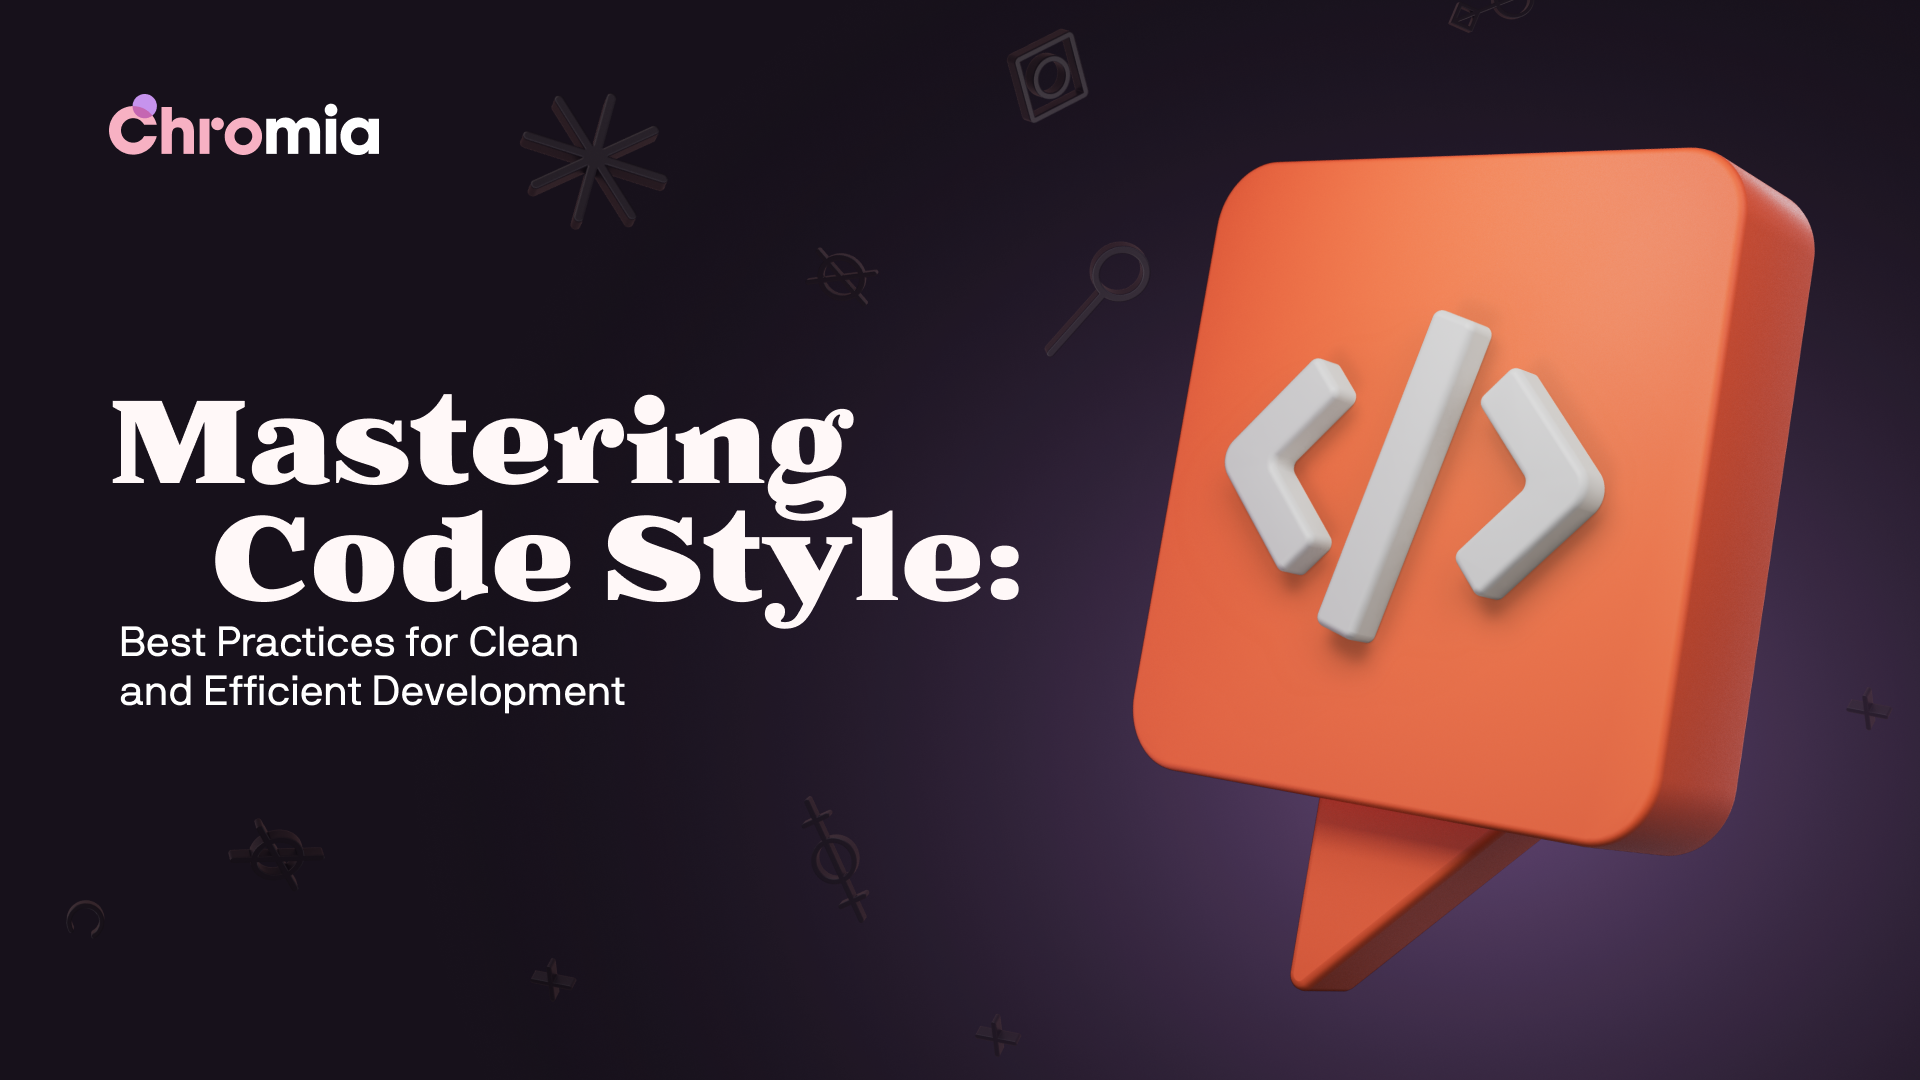 Mastering Code Style: Best Practices for Clean and Efficient Development